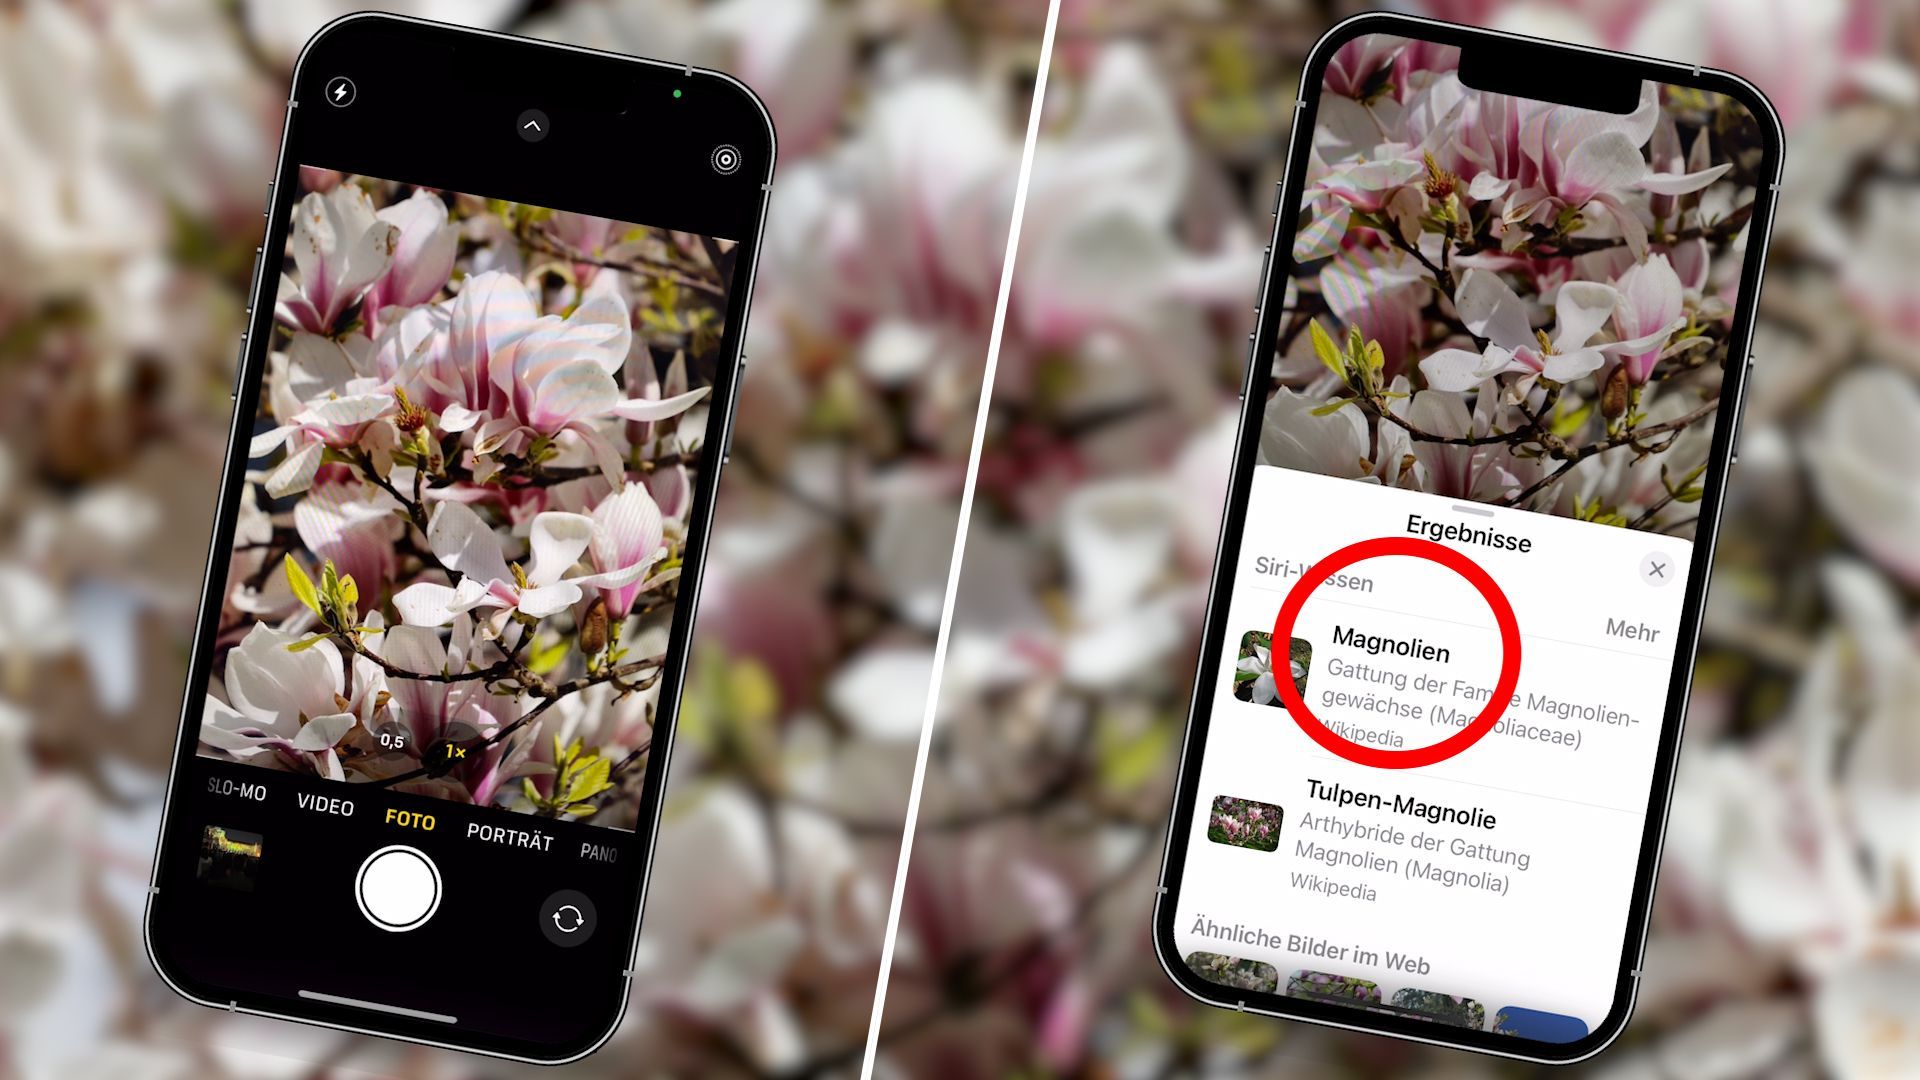 No app required: Identify plants with your iPhone - here's how